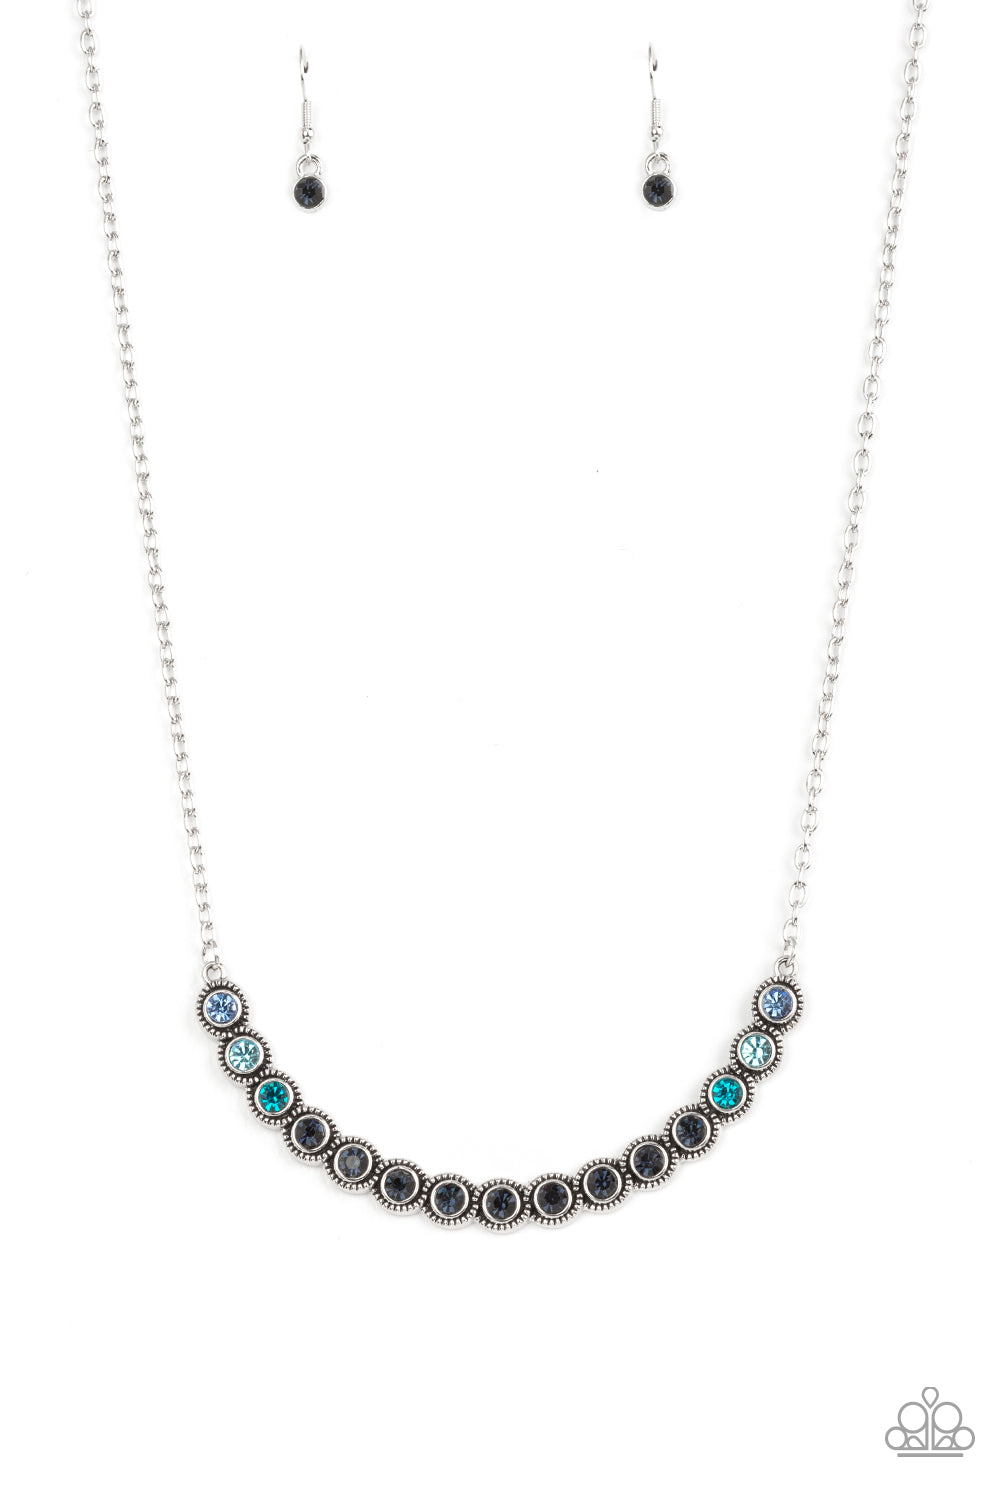 THROWING SHADES BLUE-NECKLACE